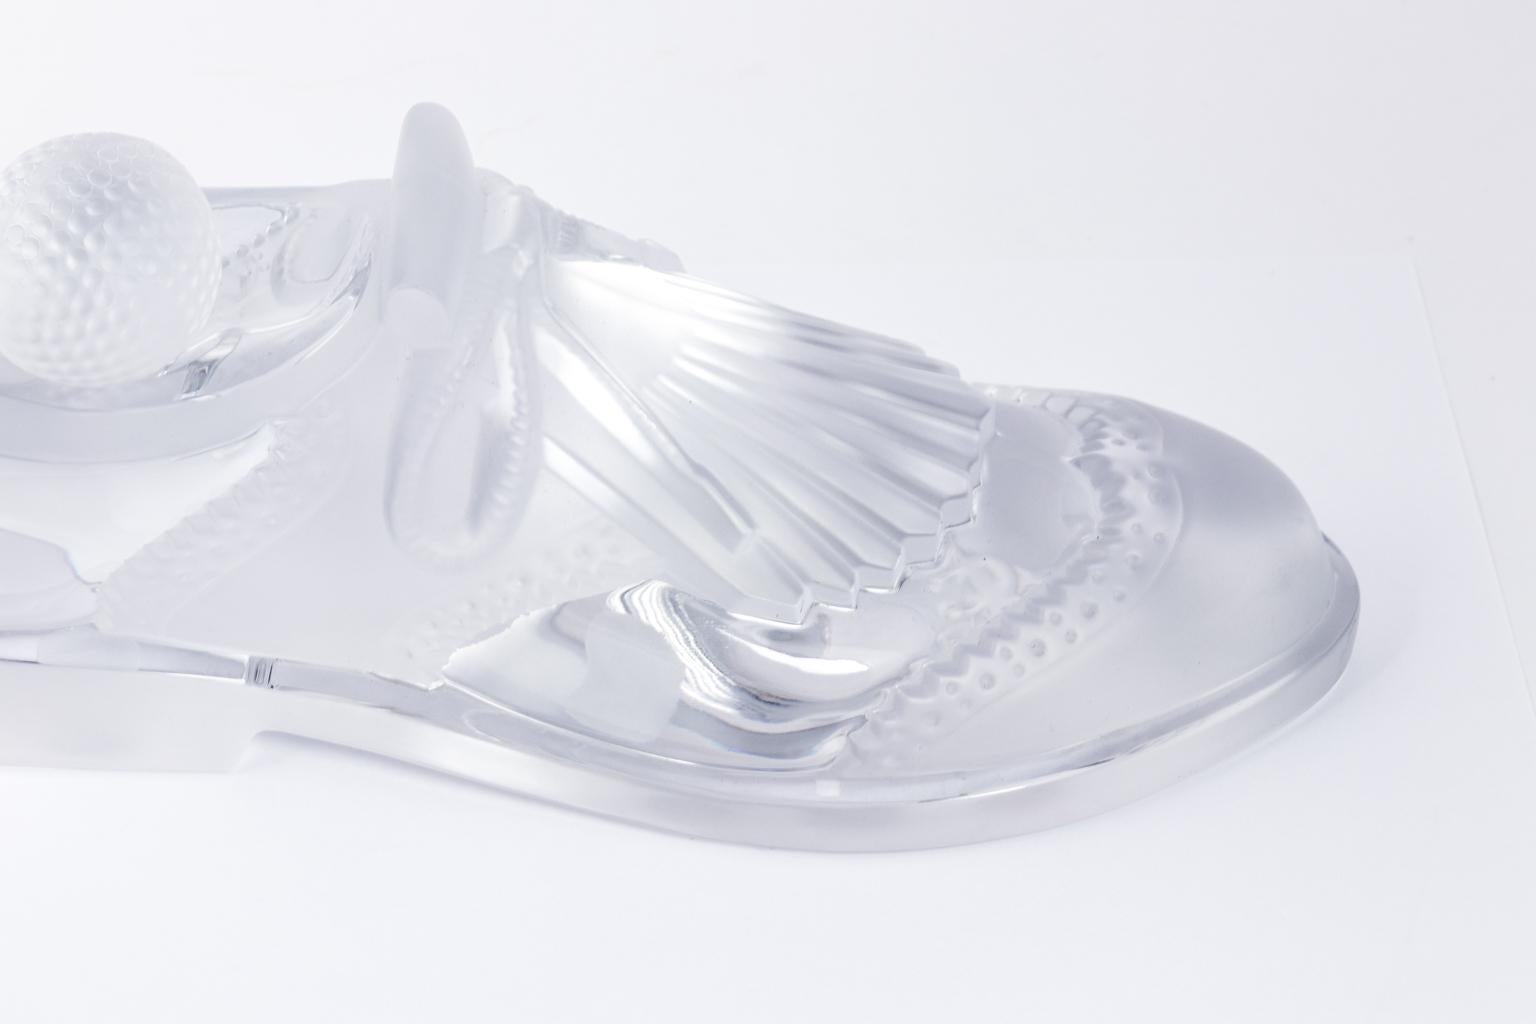 Crystal Golf Shoe and Bell by Royales De Champagne 2